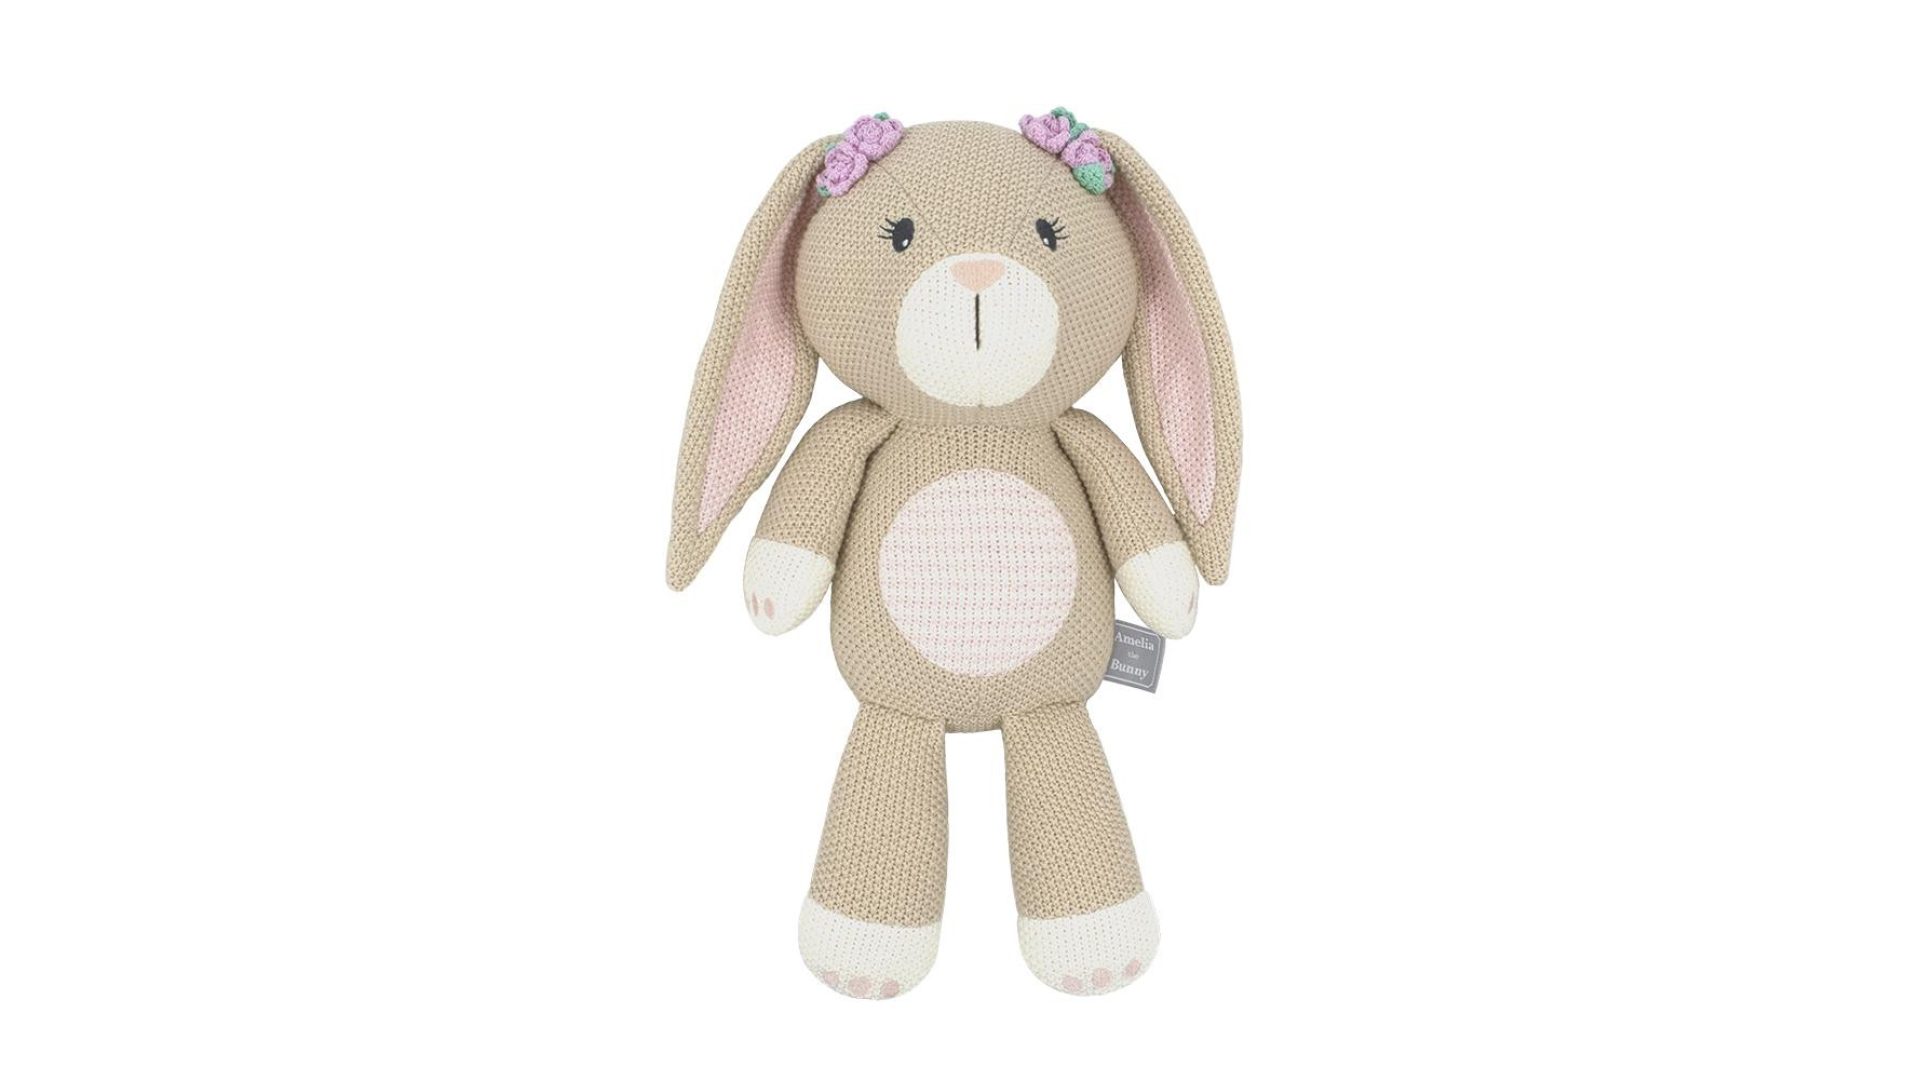 Whimsical Soft Toy - Amelia the Bunny